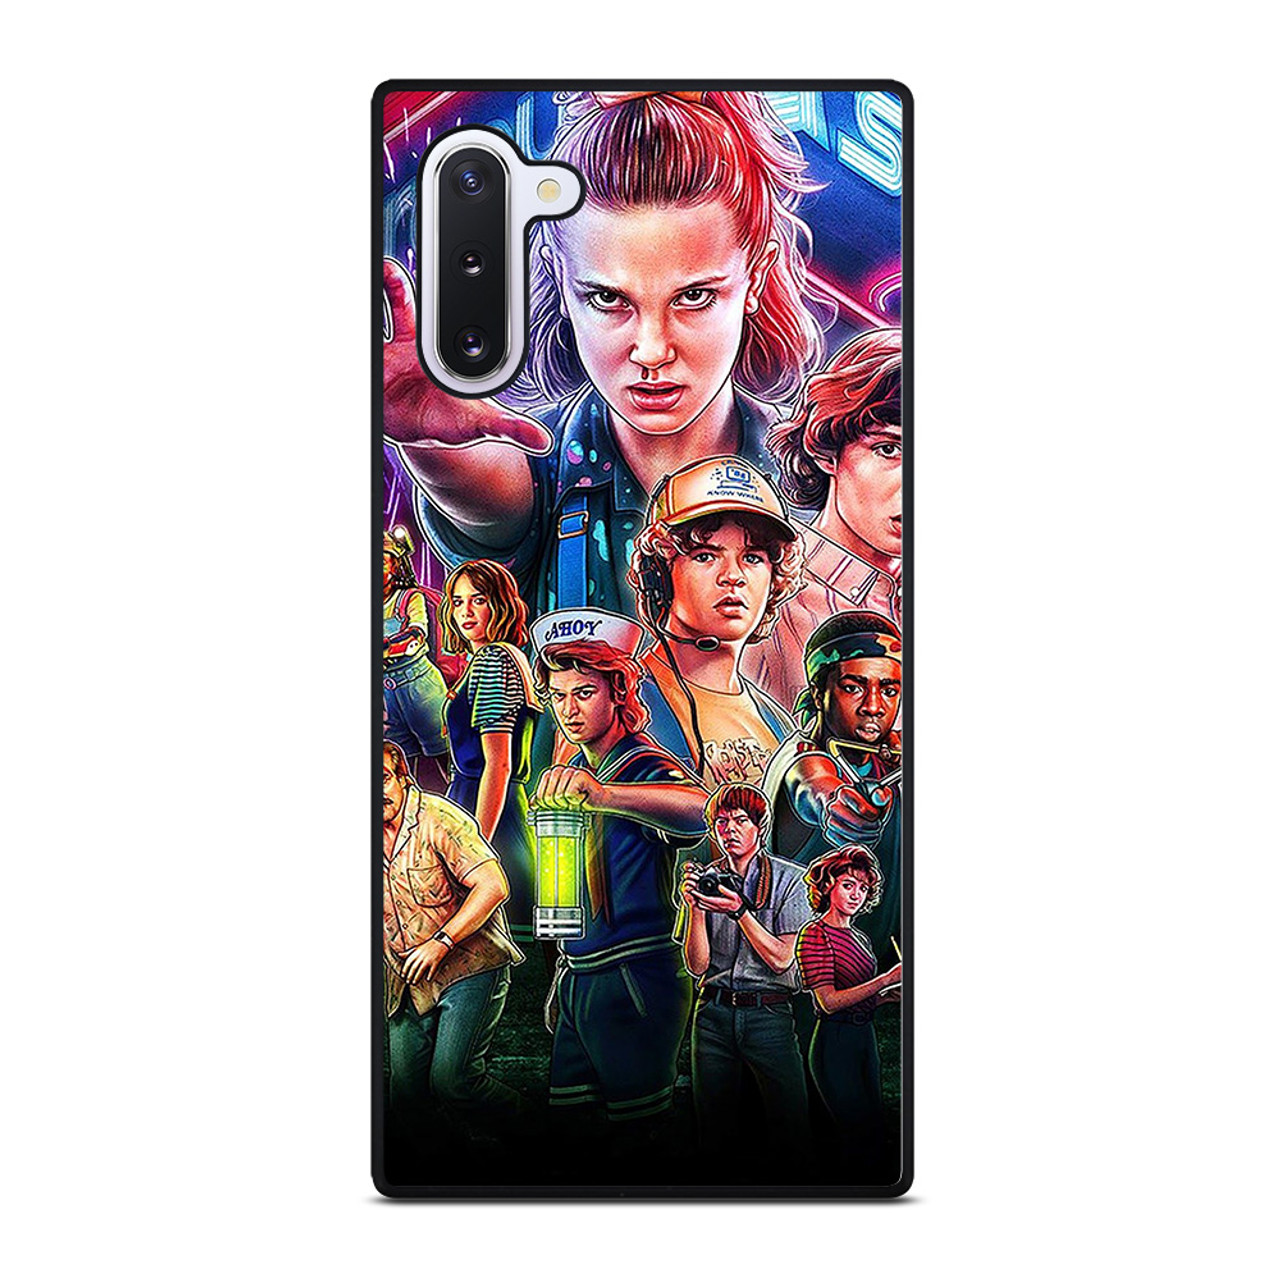 STRANGER THINGS CHARACTERS ART Samsung Galaxy Note 10 Case Cover